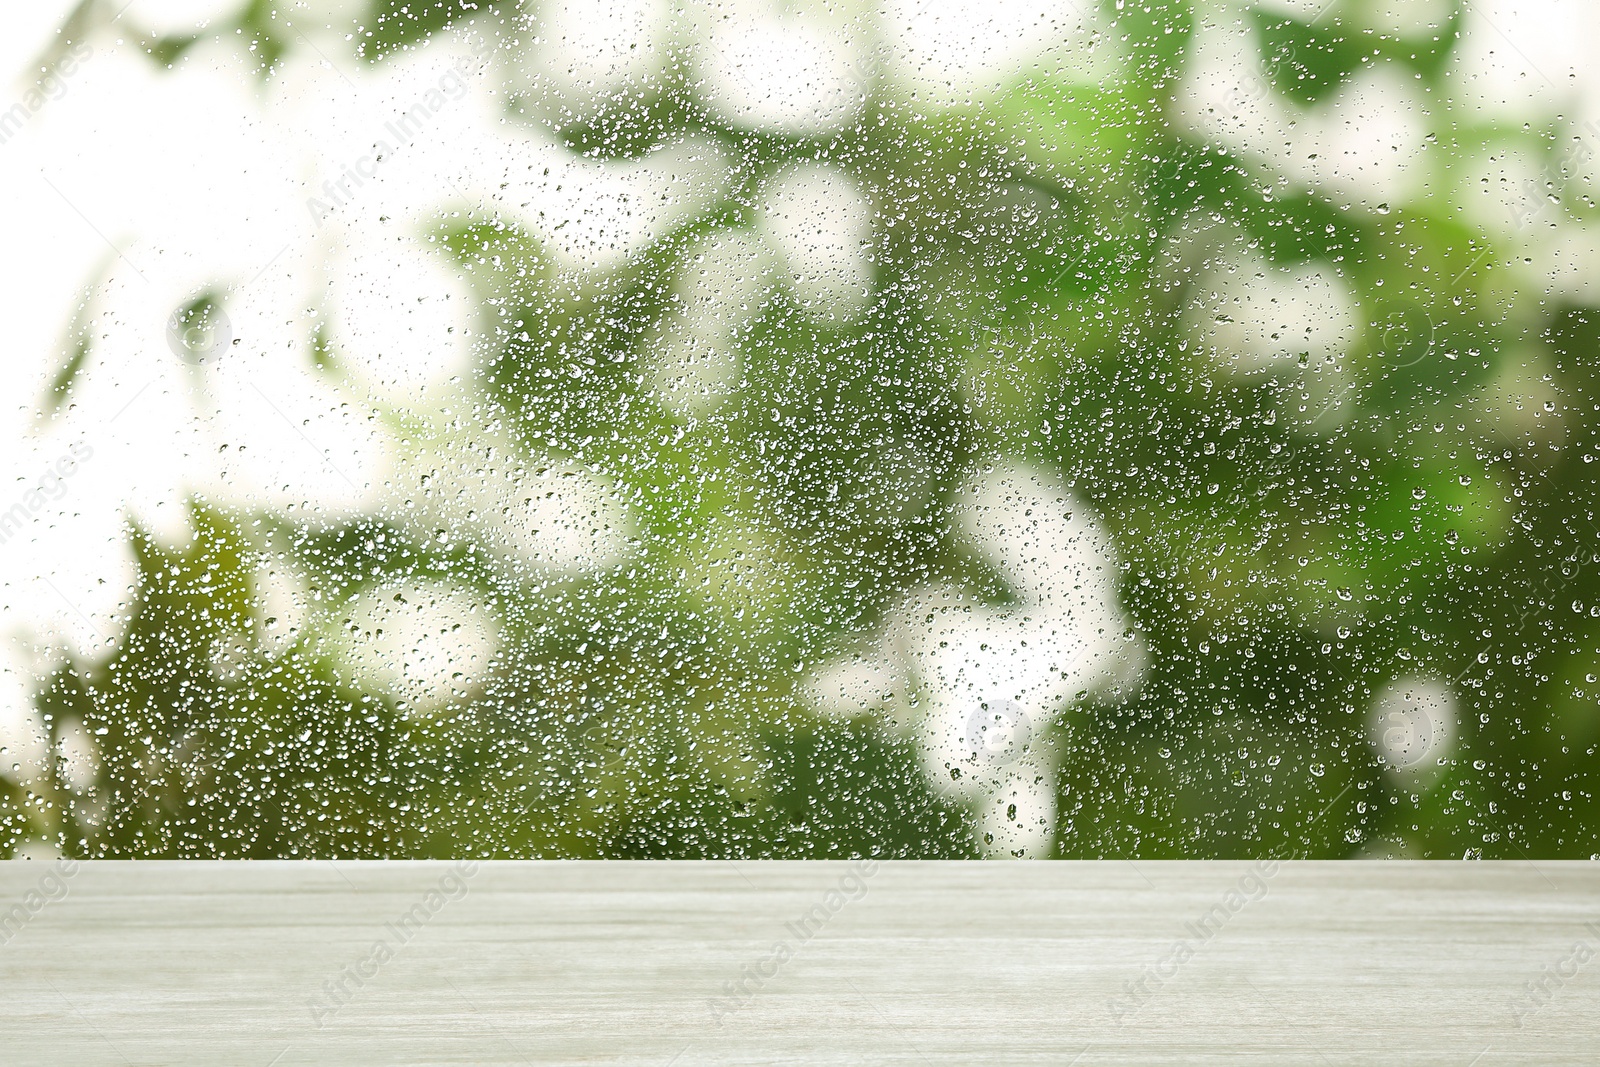 Image of White wooden table near window on rainy day